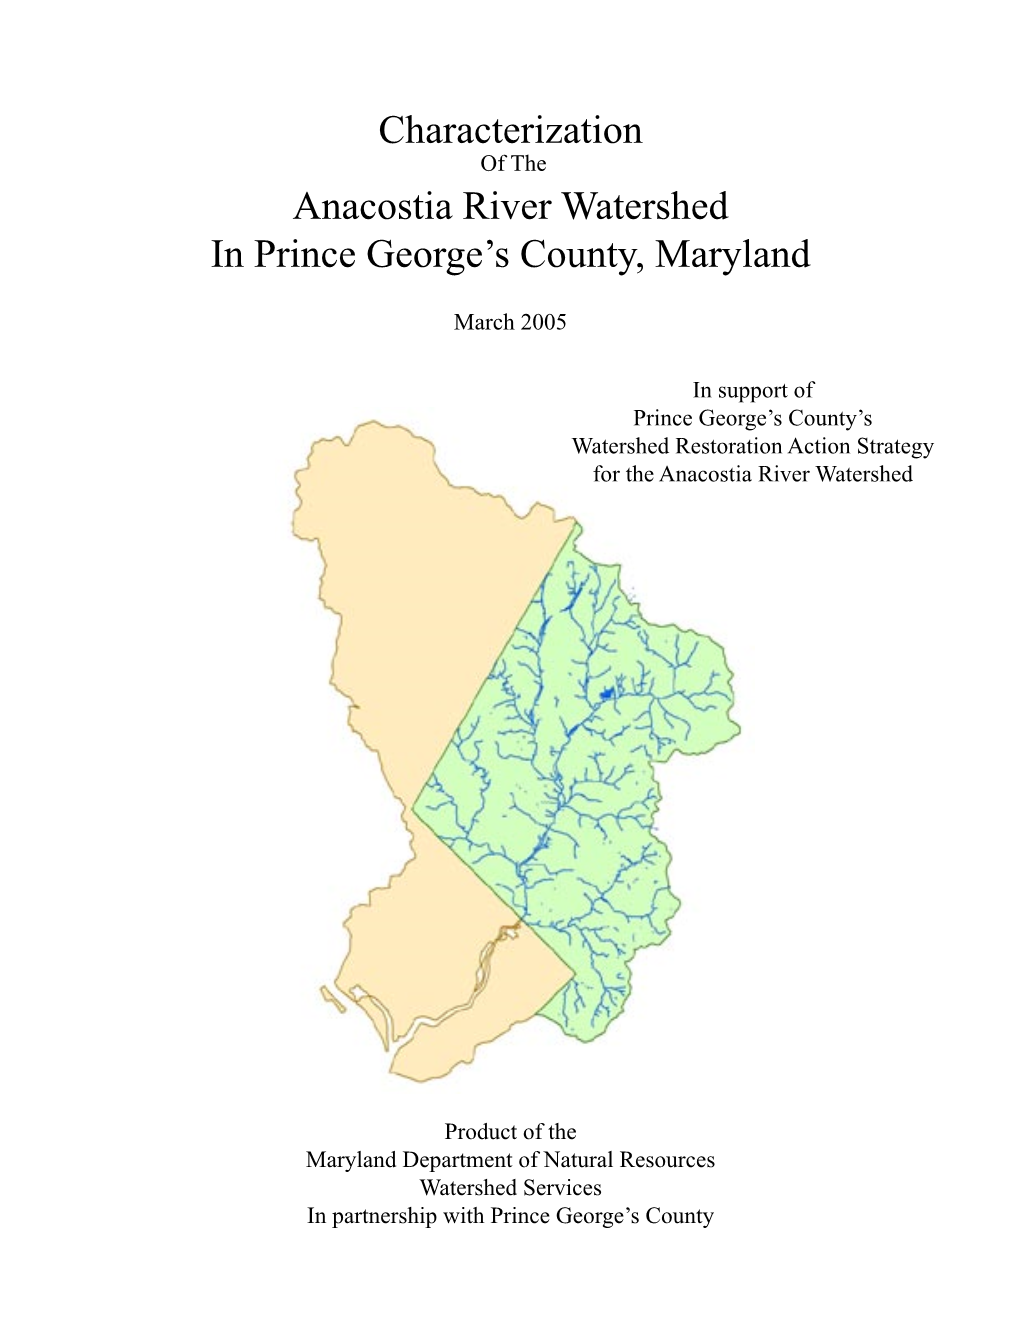 Anacostia River Watershed in Prince George's County, Maryland Prince George's WRAS Project Area (Nearly 86 Sq